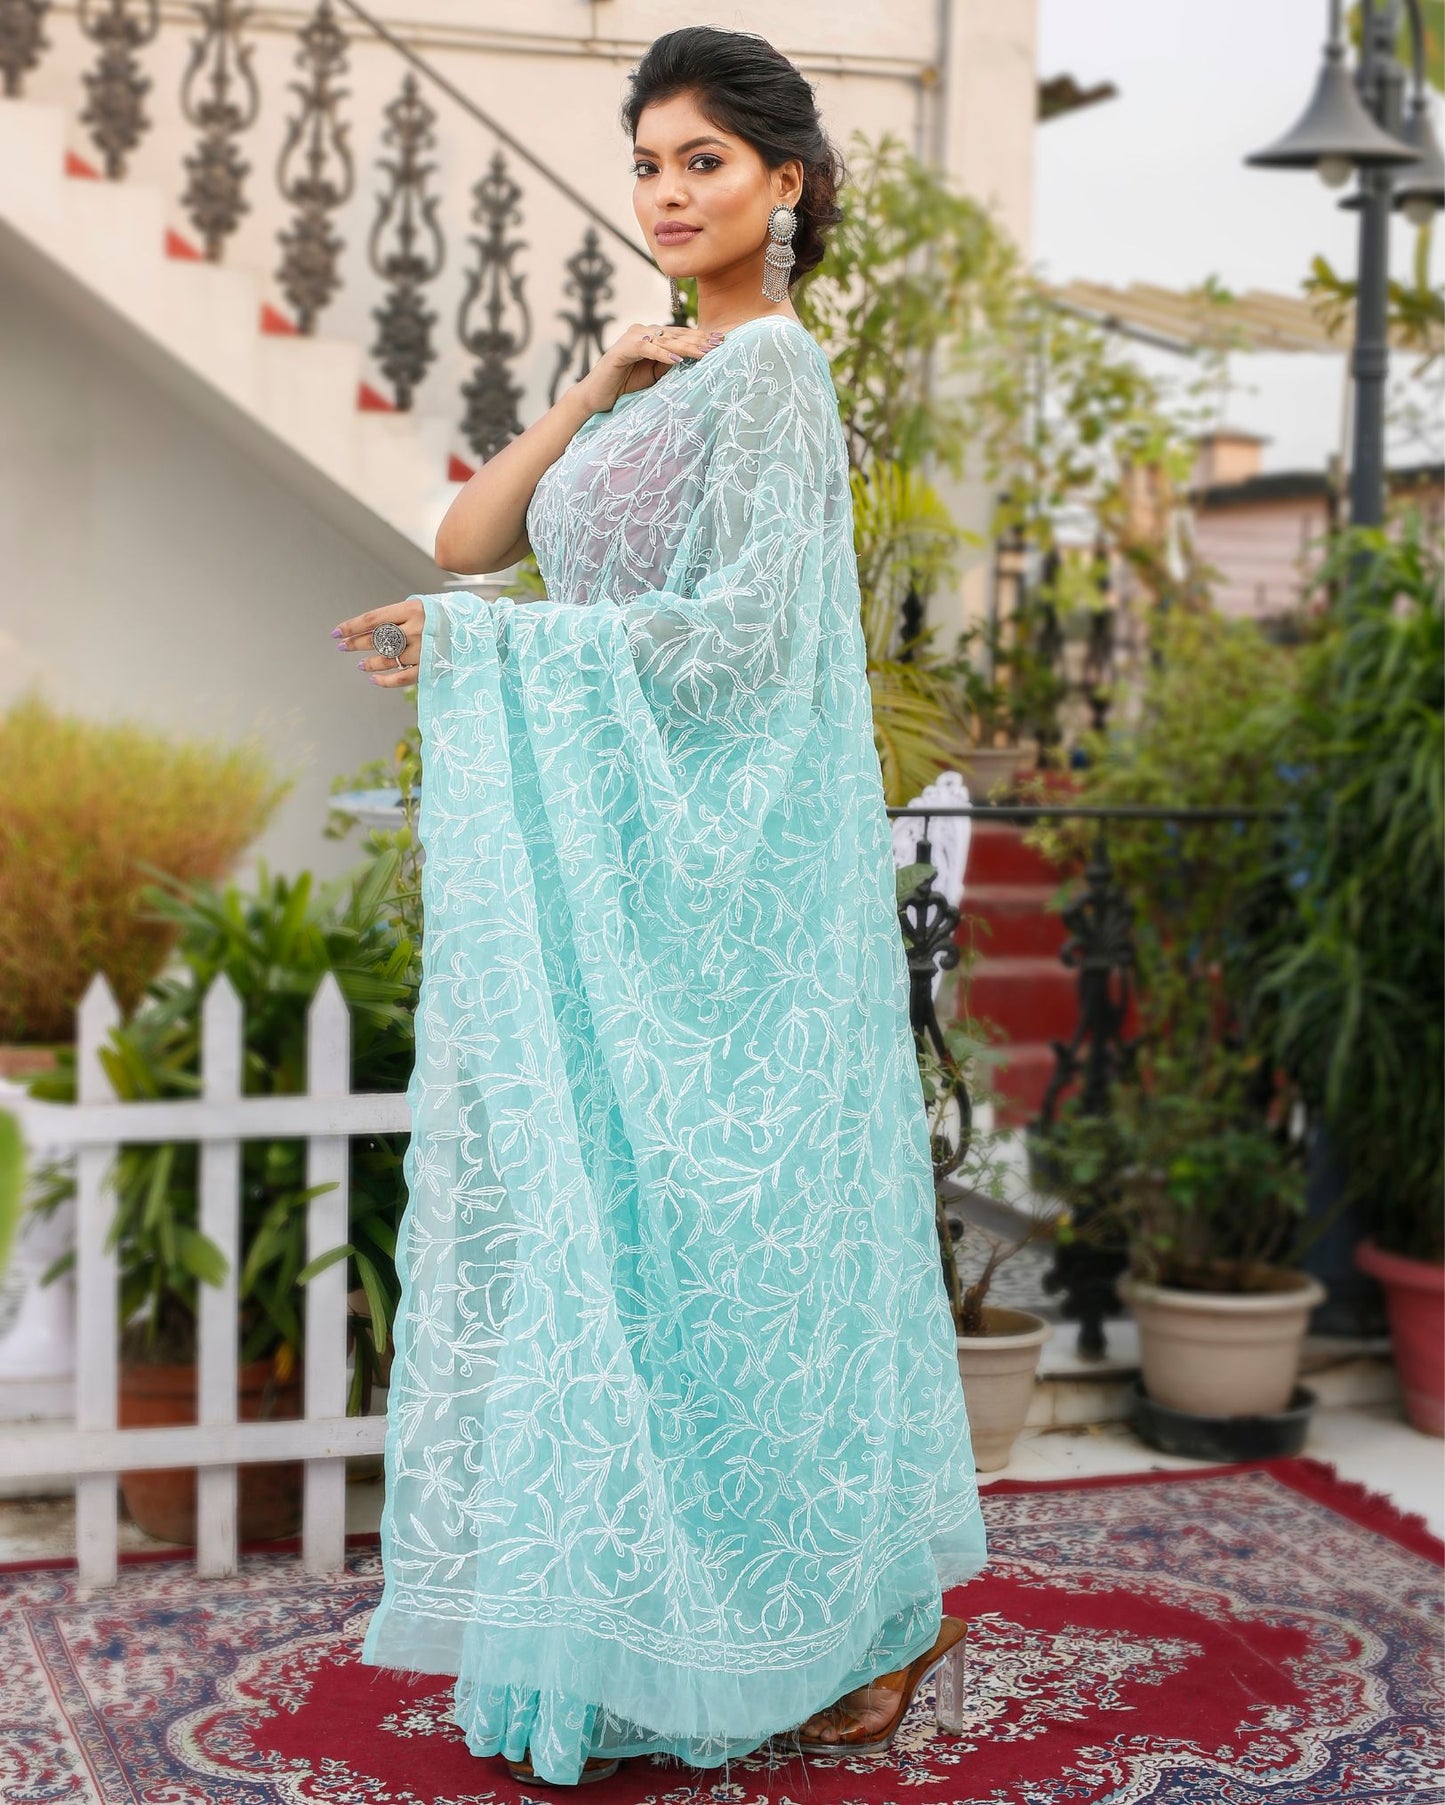 Georgette Handcrafted Saree Light Blue Color Tepchi work with Running Blouse - IndieHaat